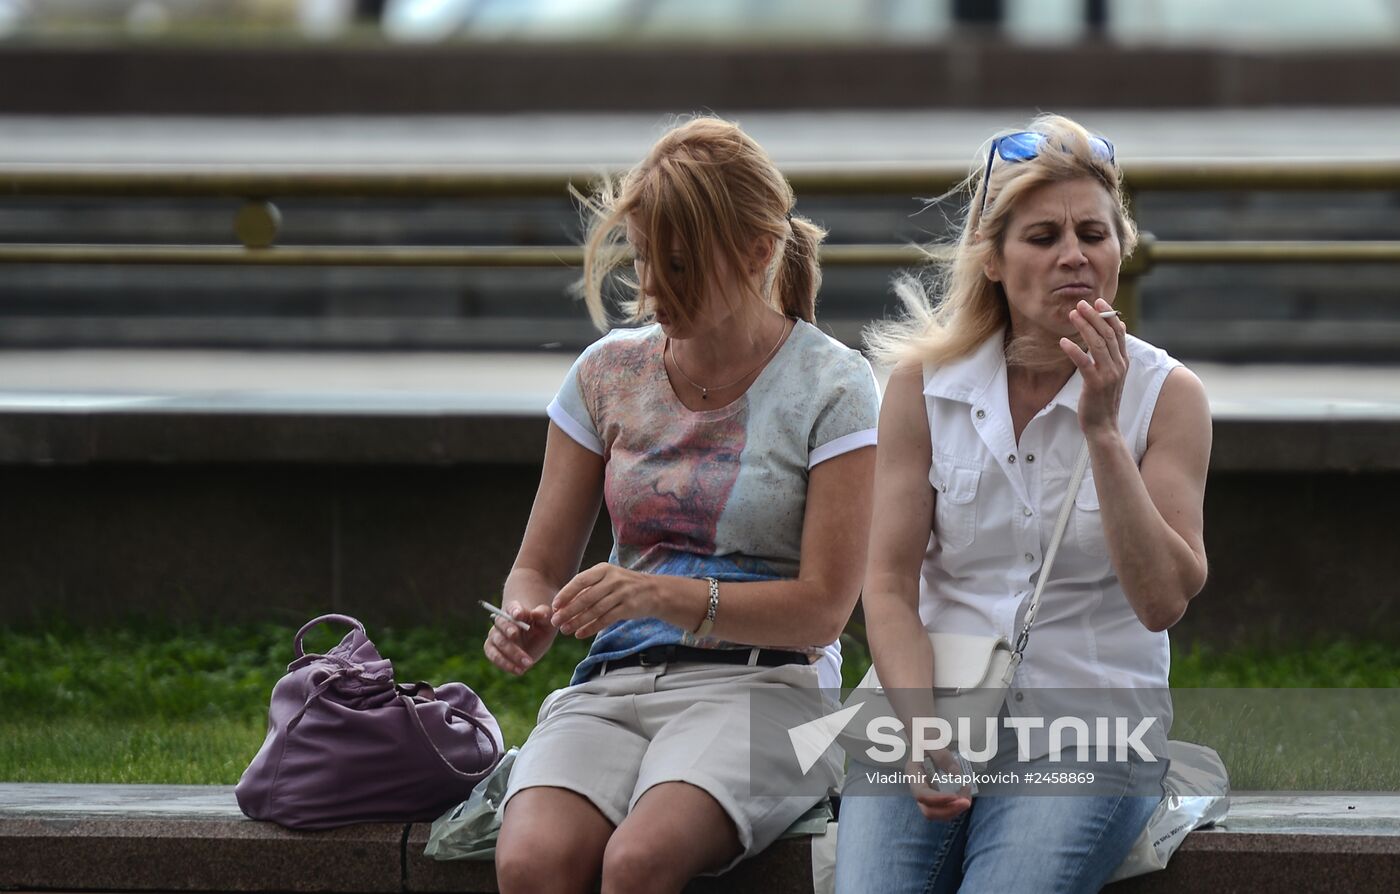 Smoking in public places